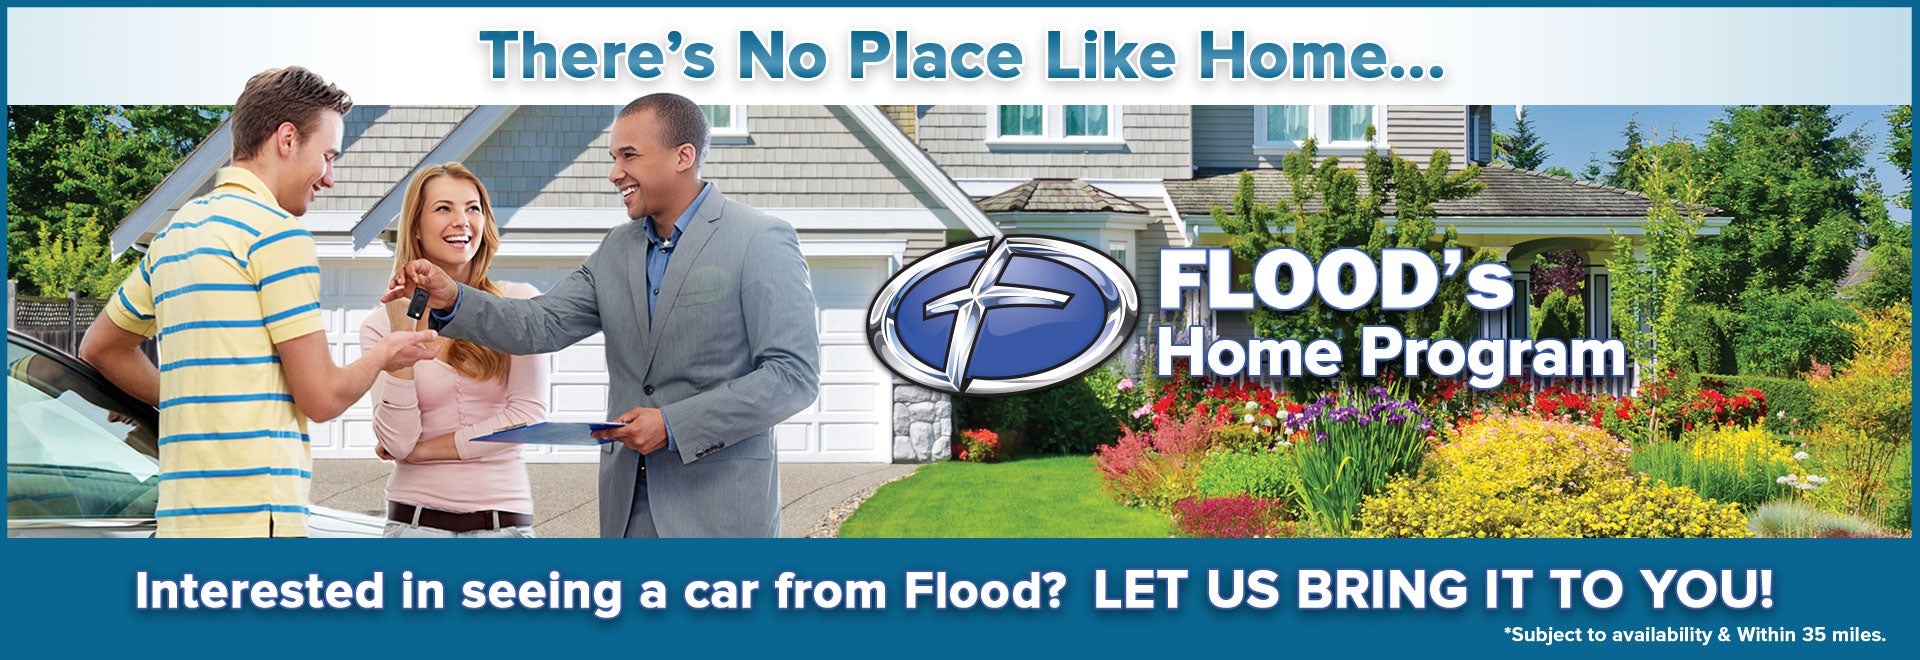 Flood Ford Home Delivery